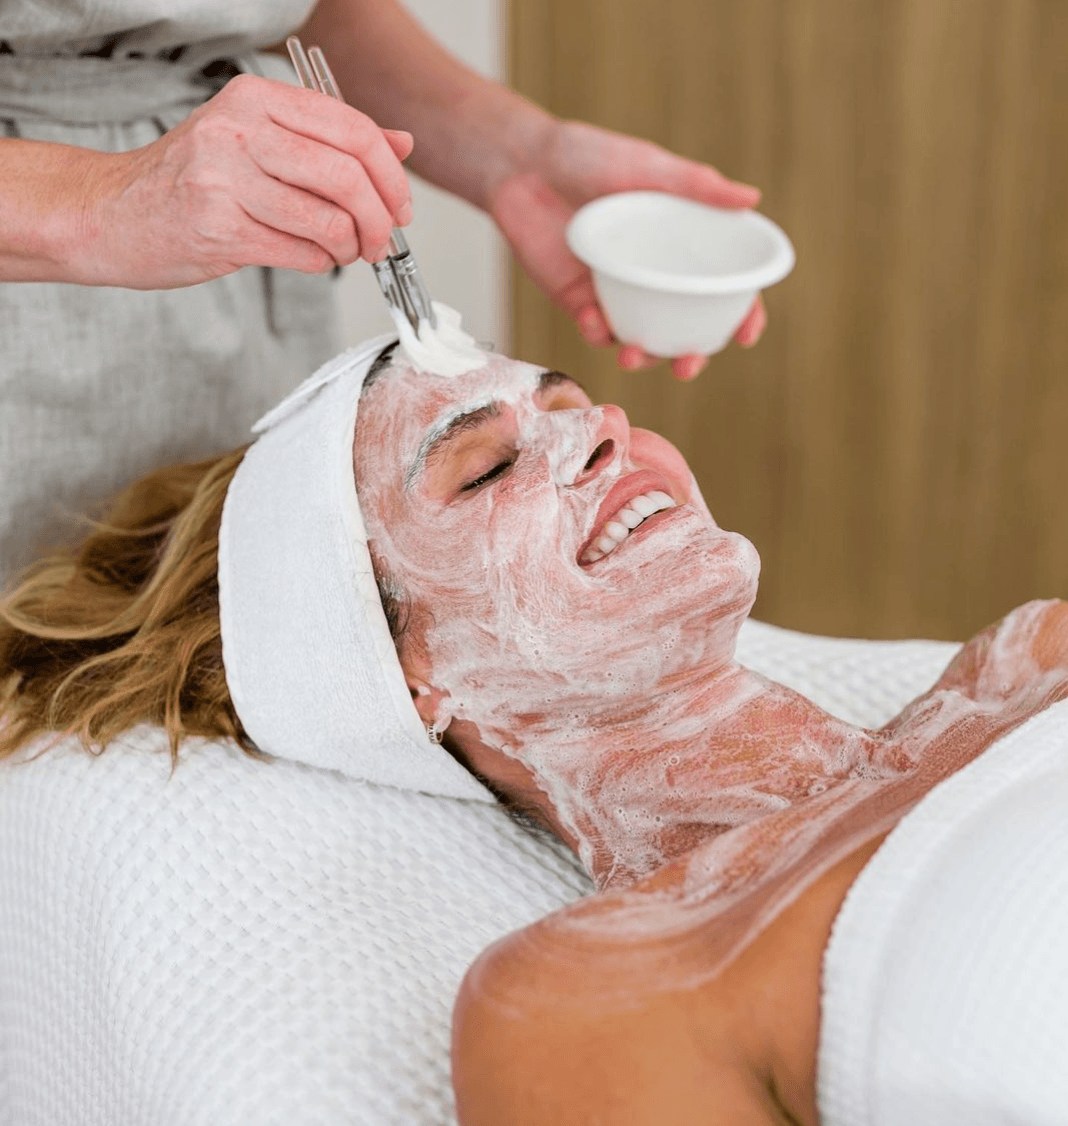 Relaxation and beauty treatments